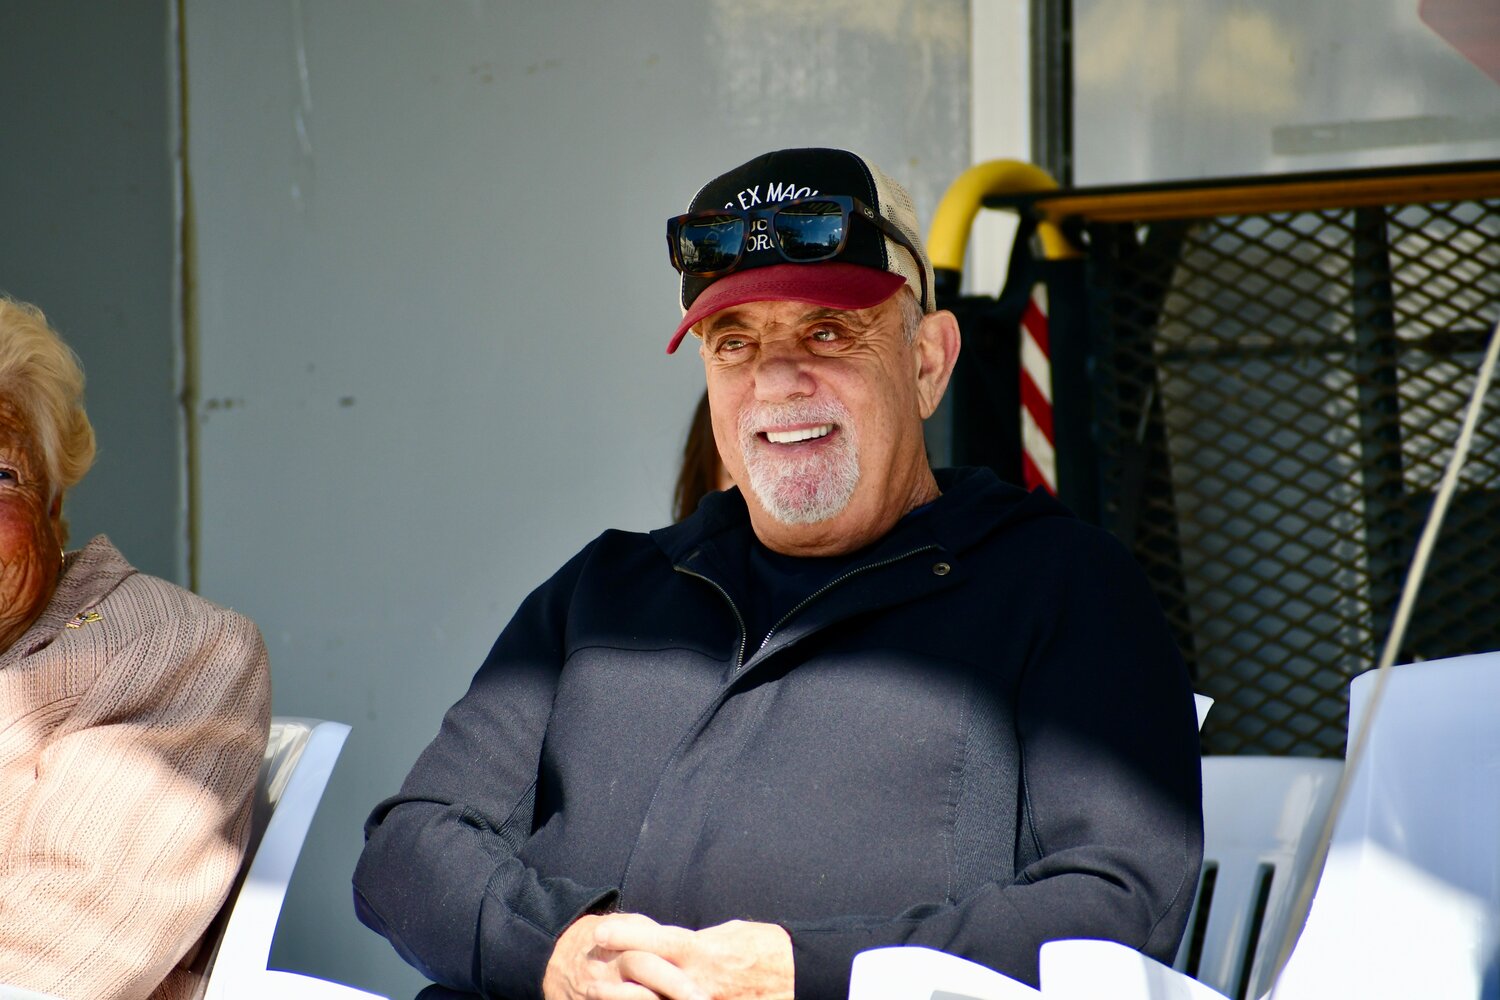 Part of Audrey Avenue was named Billy Joel Way in honor of Oyster Bay’s music legend.